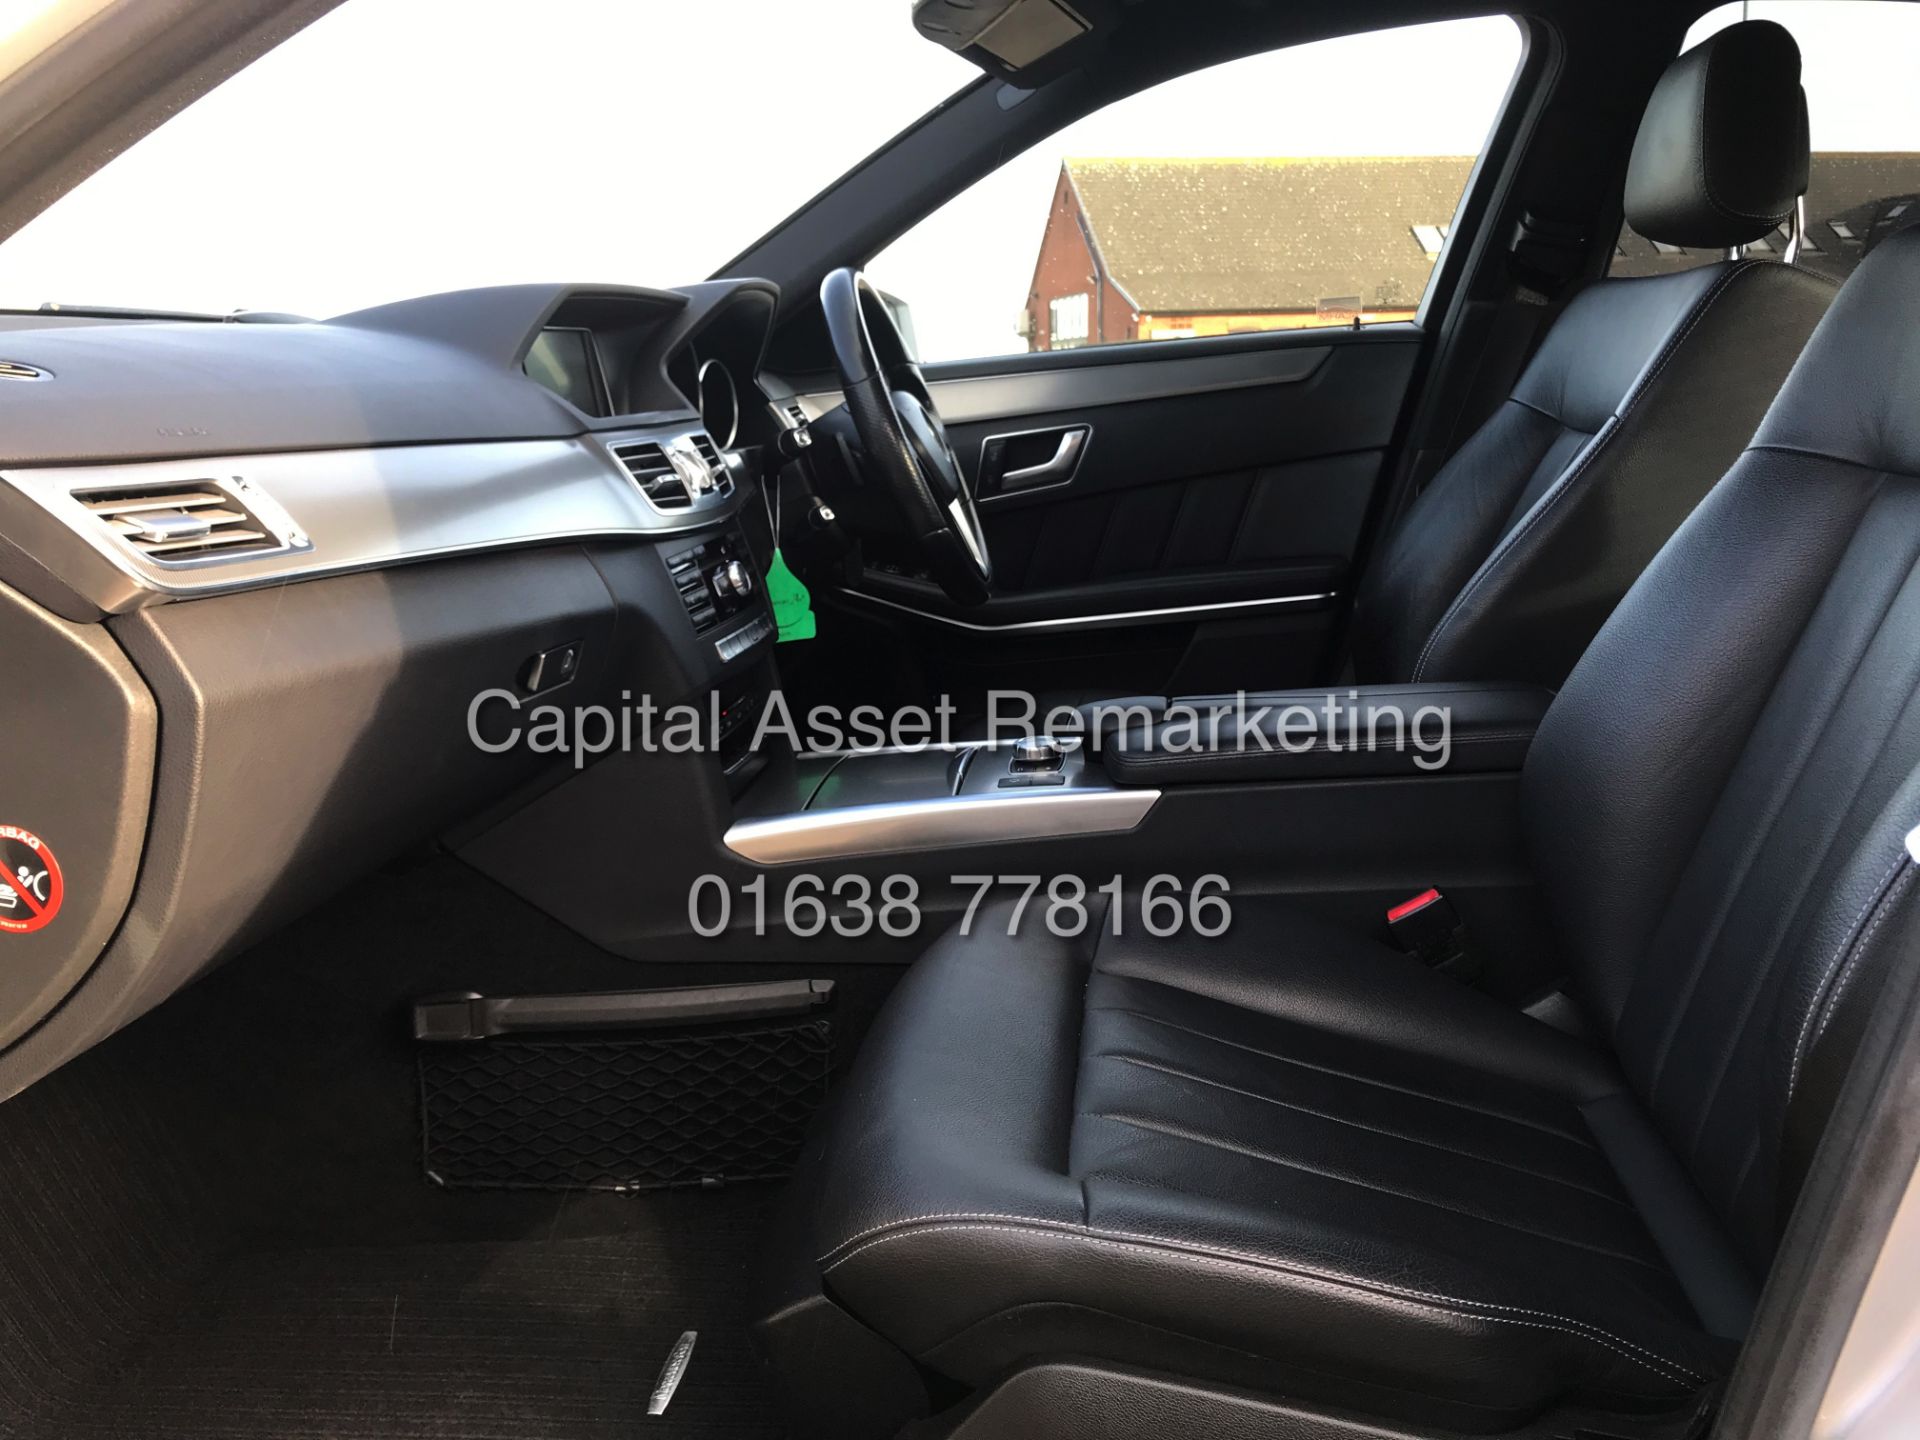 MERCEDES E220d "SPECIAL EQUIPMENT" 7G TRONIC AUTO (2015 MODEL) 1 OWNER - SAT NAV - LEATHER - Image 14 of 26